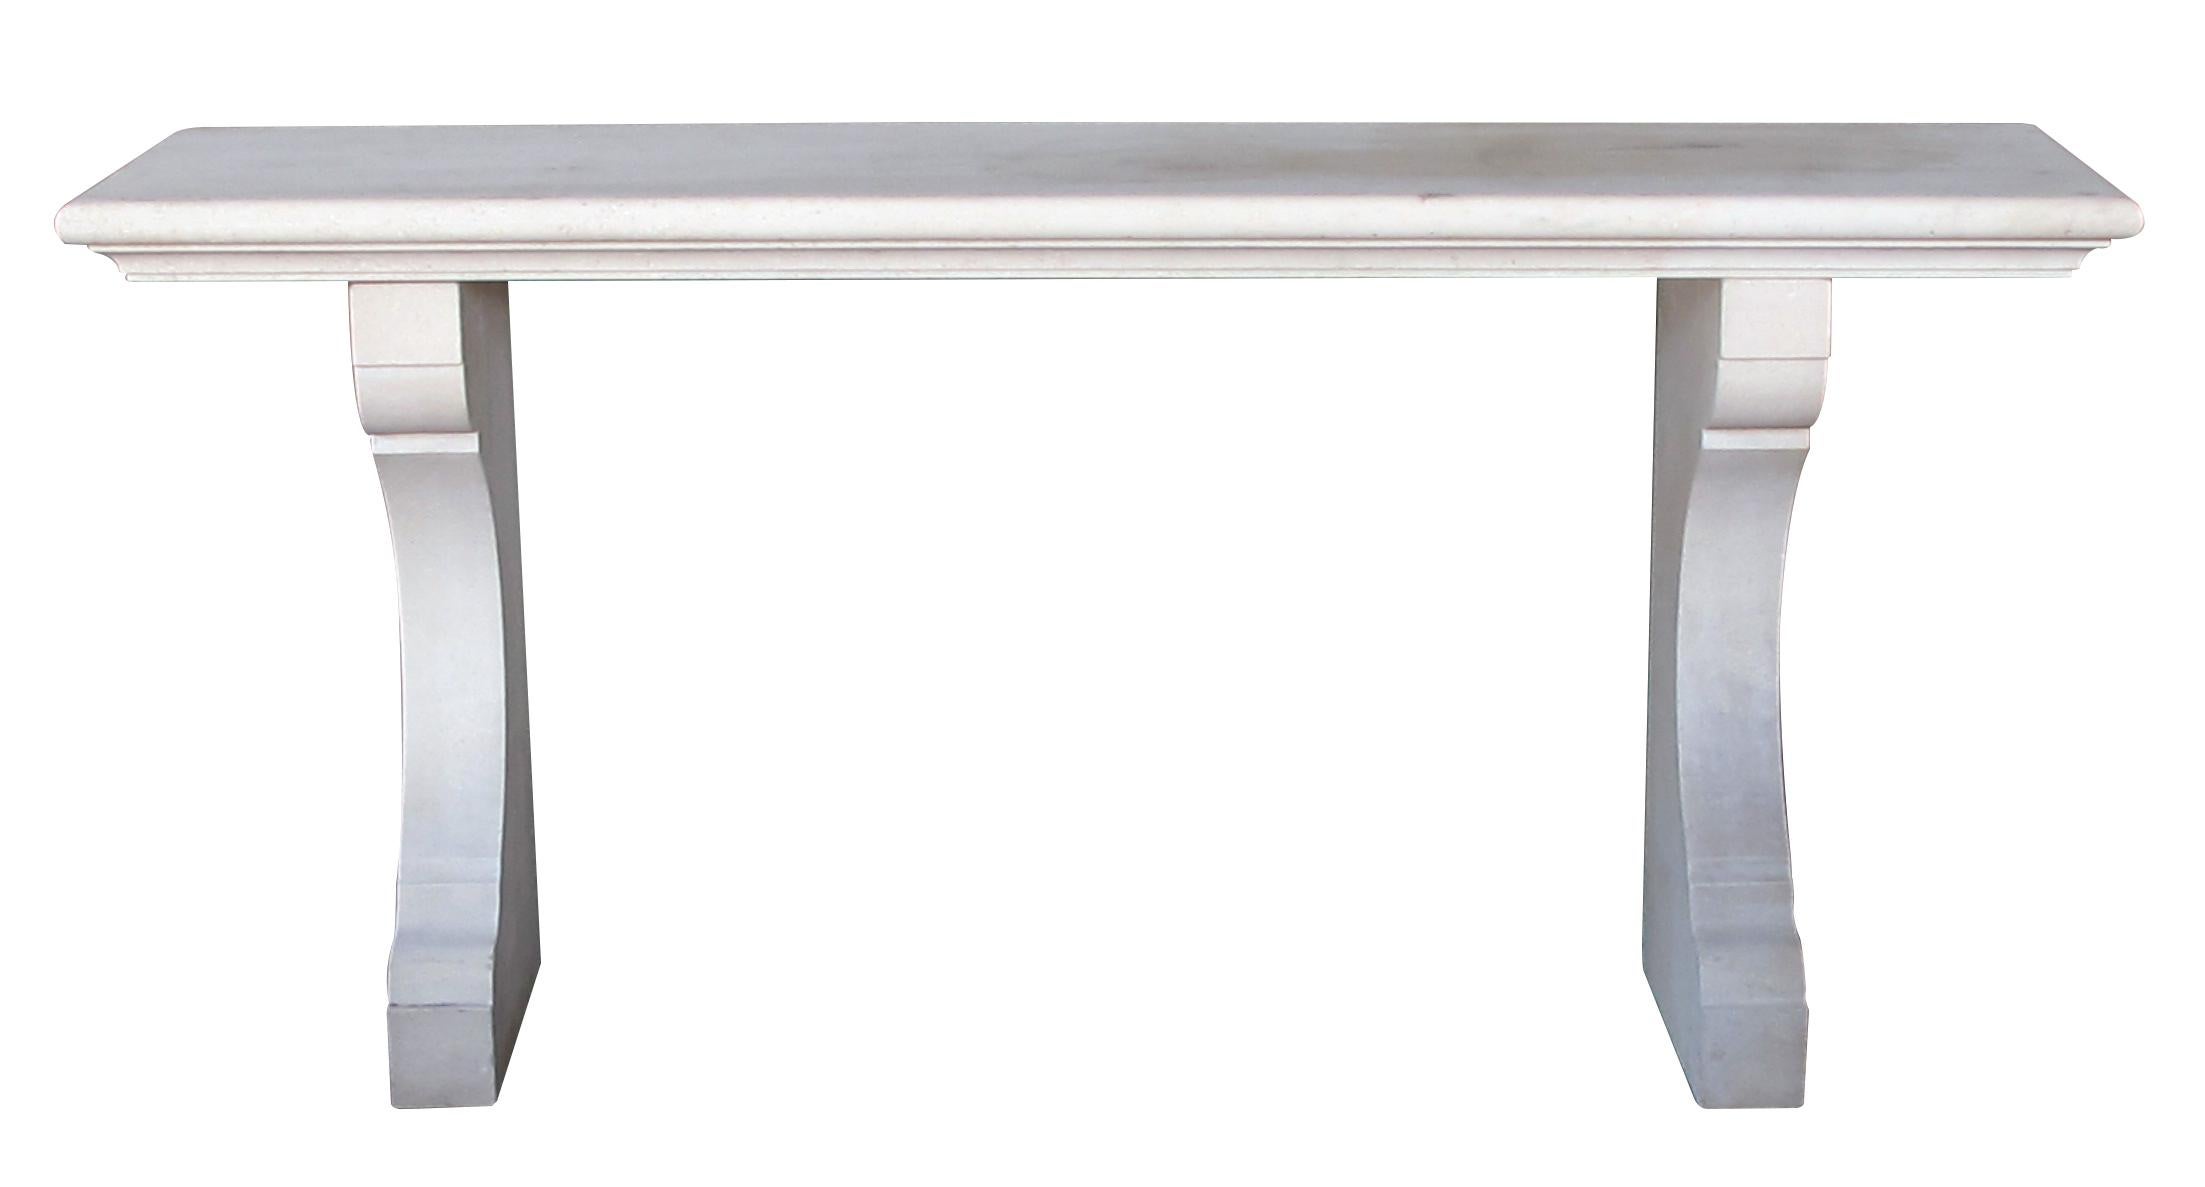 imported from France and in three pieces, the thick rectangular top with ogee edge raised on concave supports; great for outdoor patio or interior use